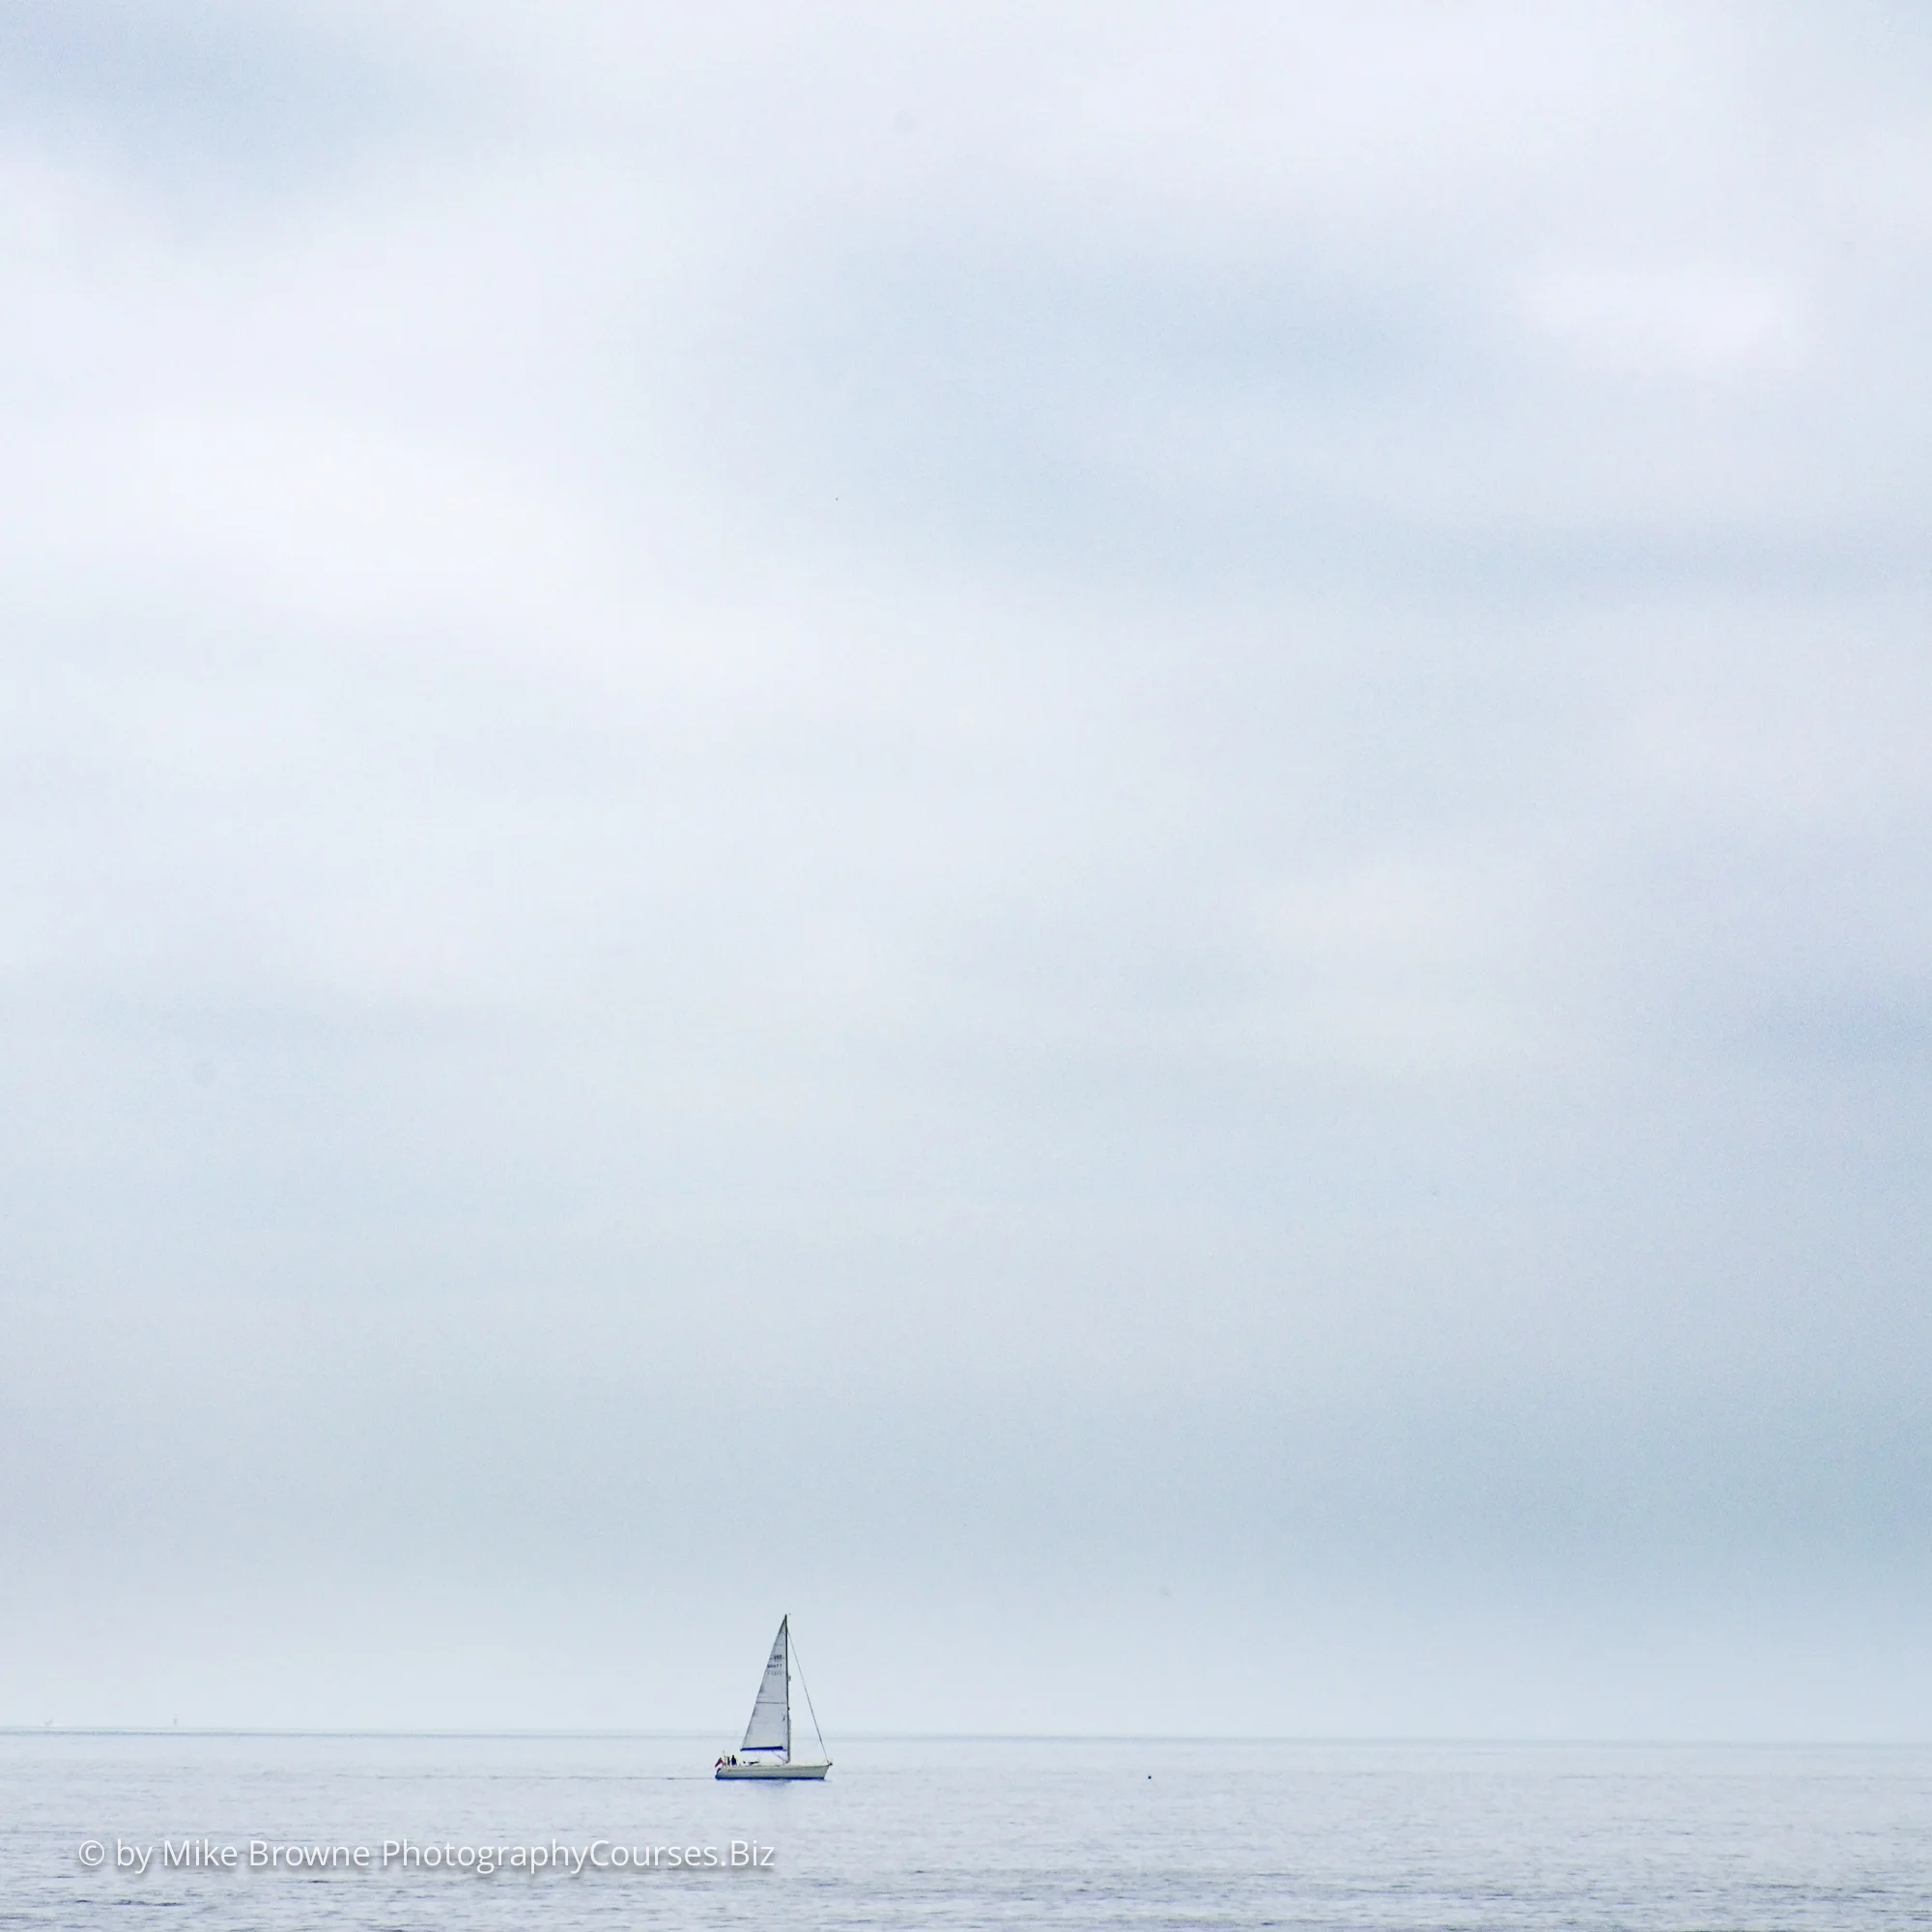 Sailboat small in the distance on a clam sea with gentle clouds overhead